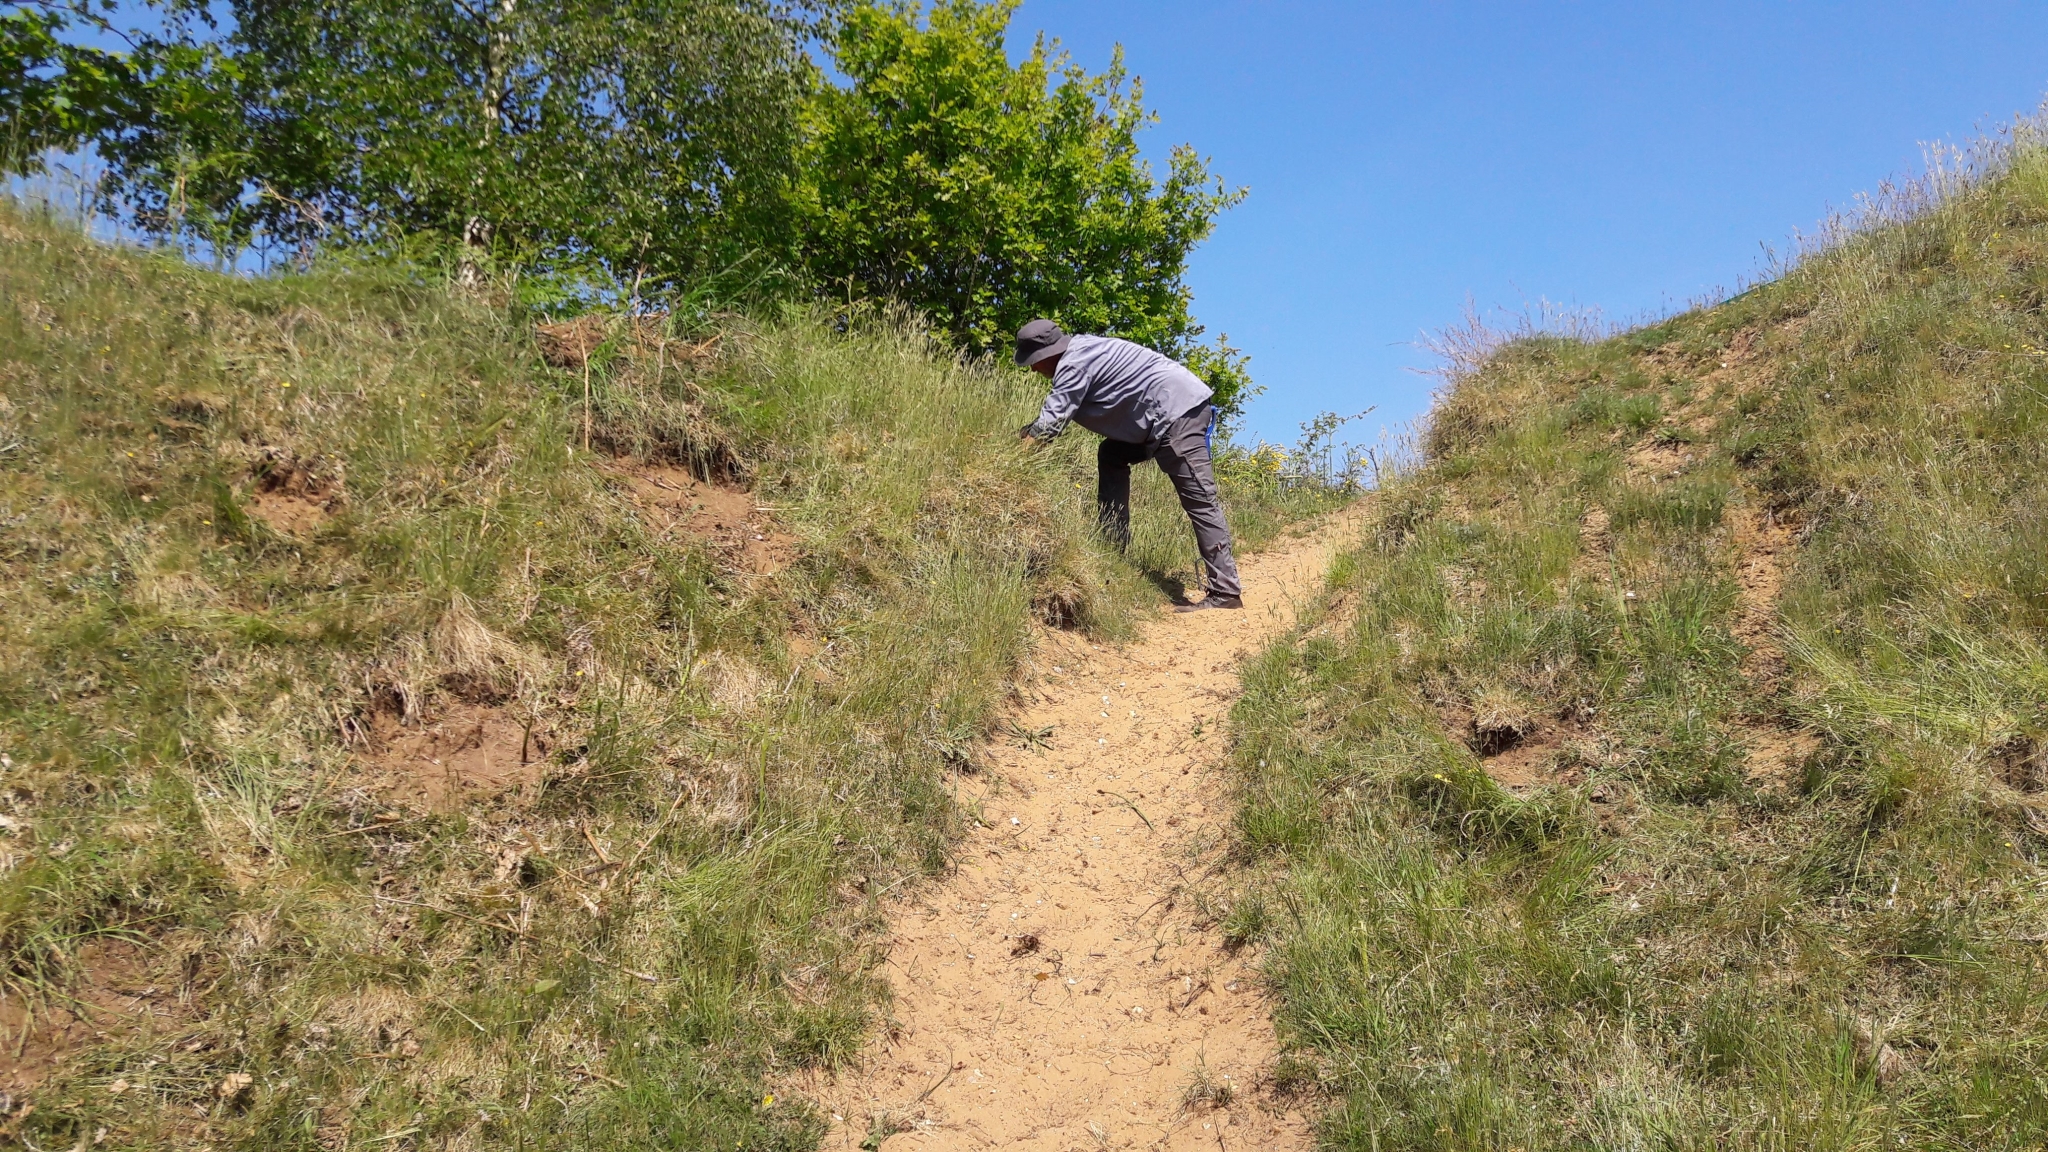 A photo from the FoTF Conservation Event - May 2018 - Open Day preparations at Mildenhall Mugwort Pits & Mildenhall Warren Lodge : A volunteer works on one of the slopes of the Mugworts pits